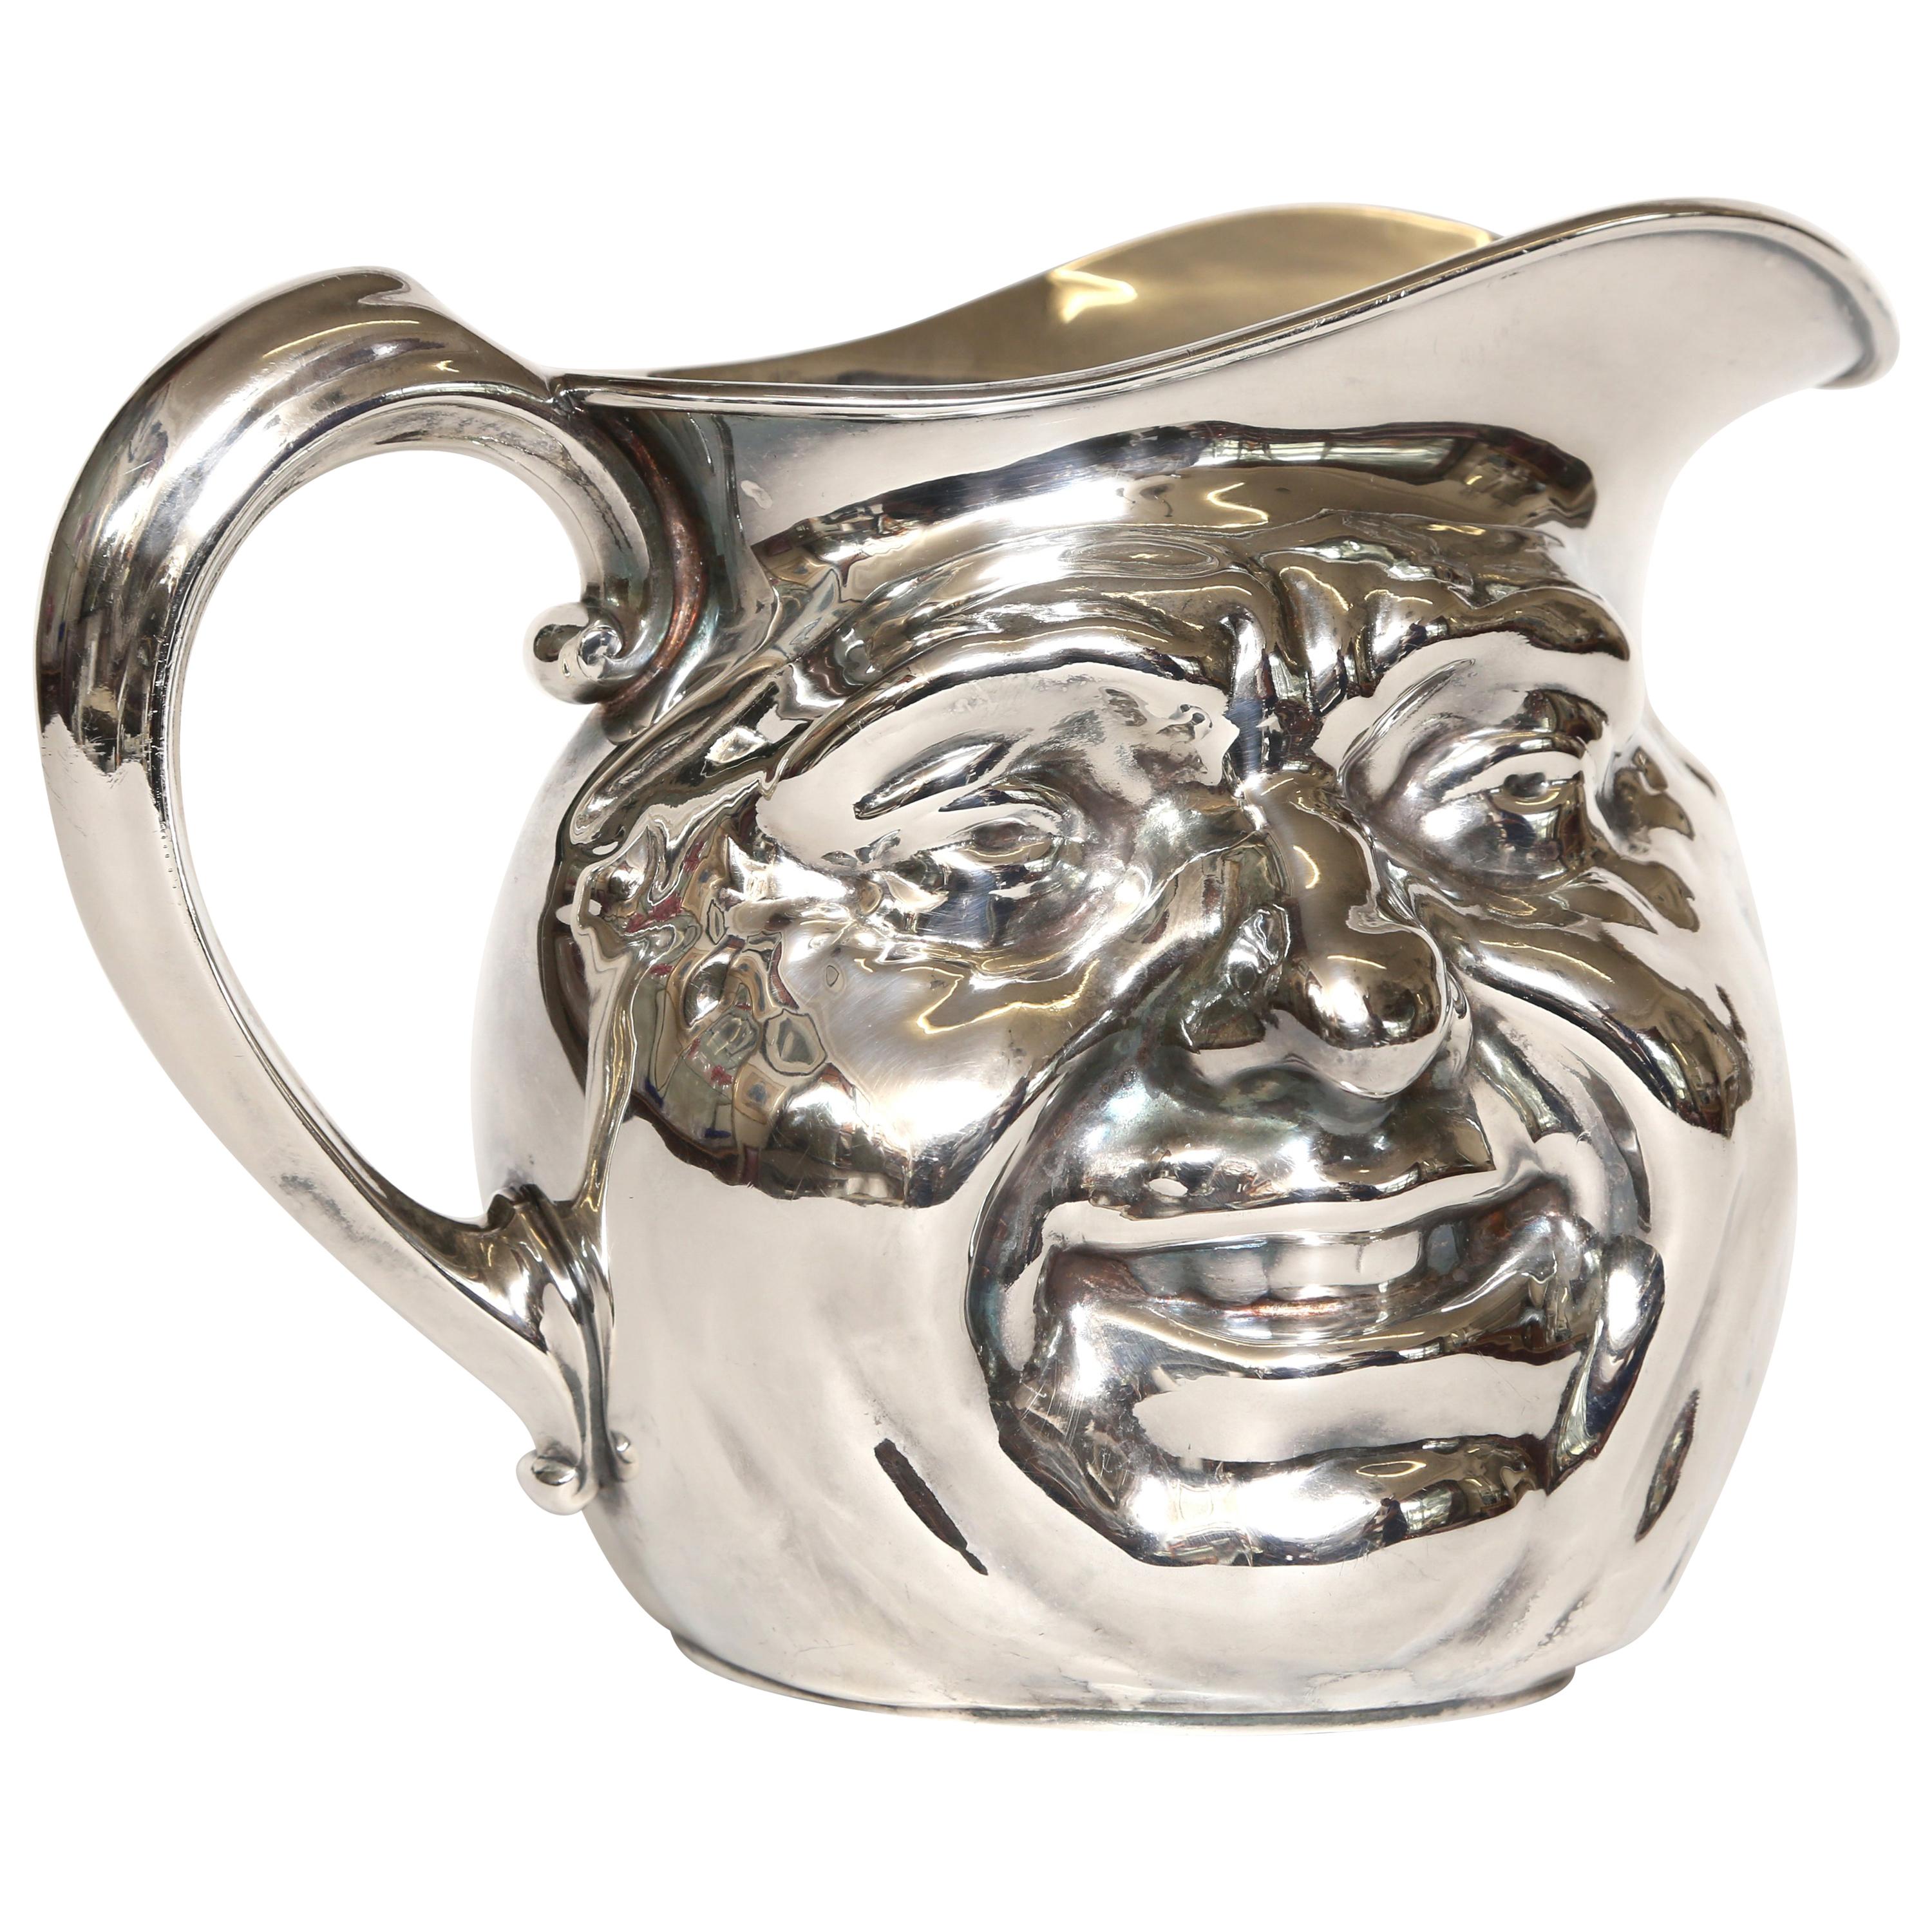 Sunny Jim Pitcher by Reed & Barton